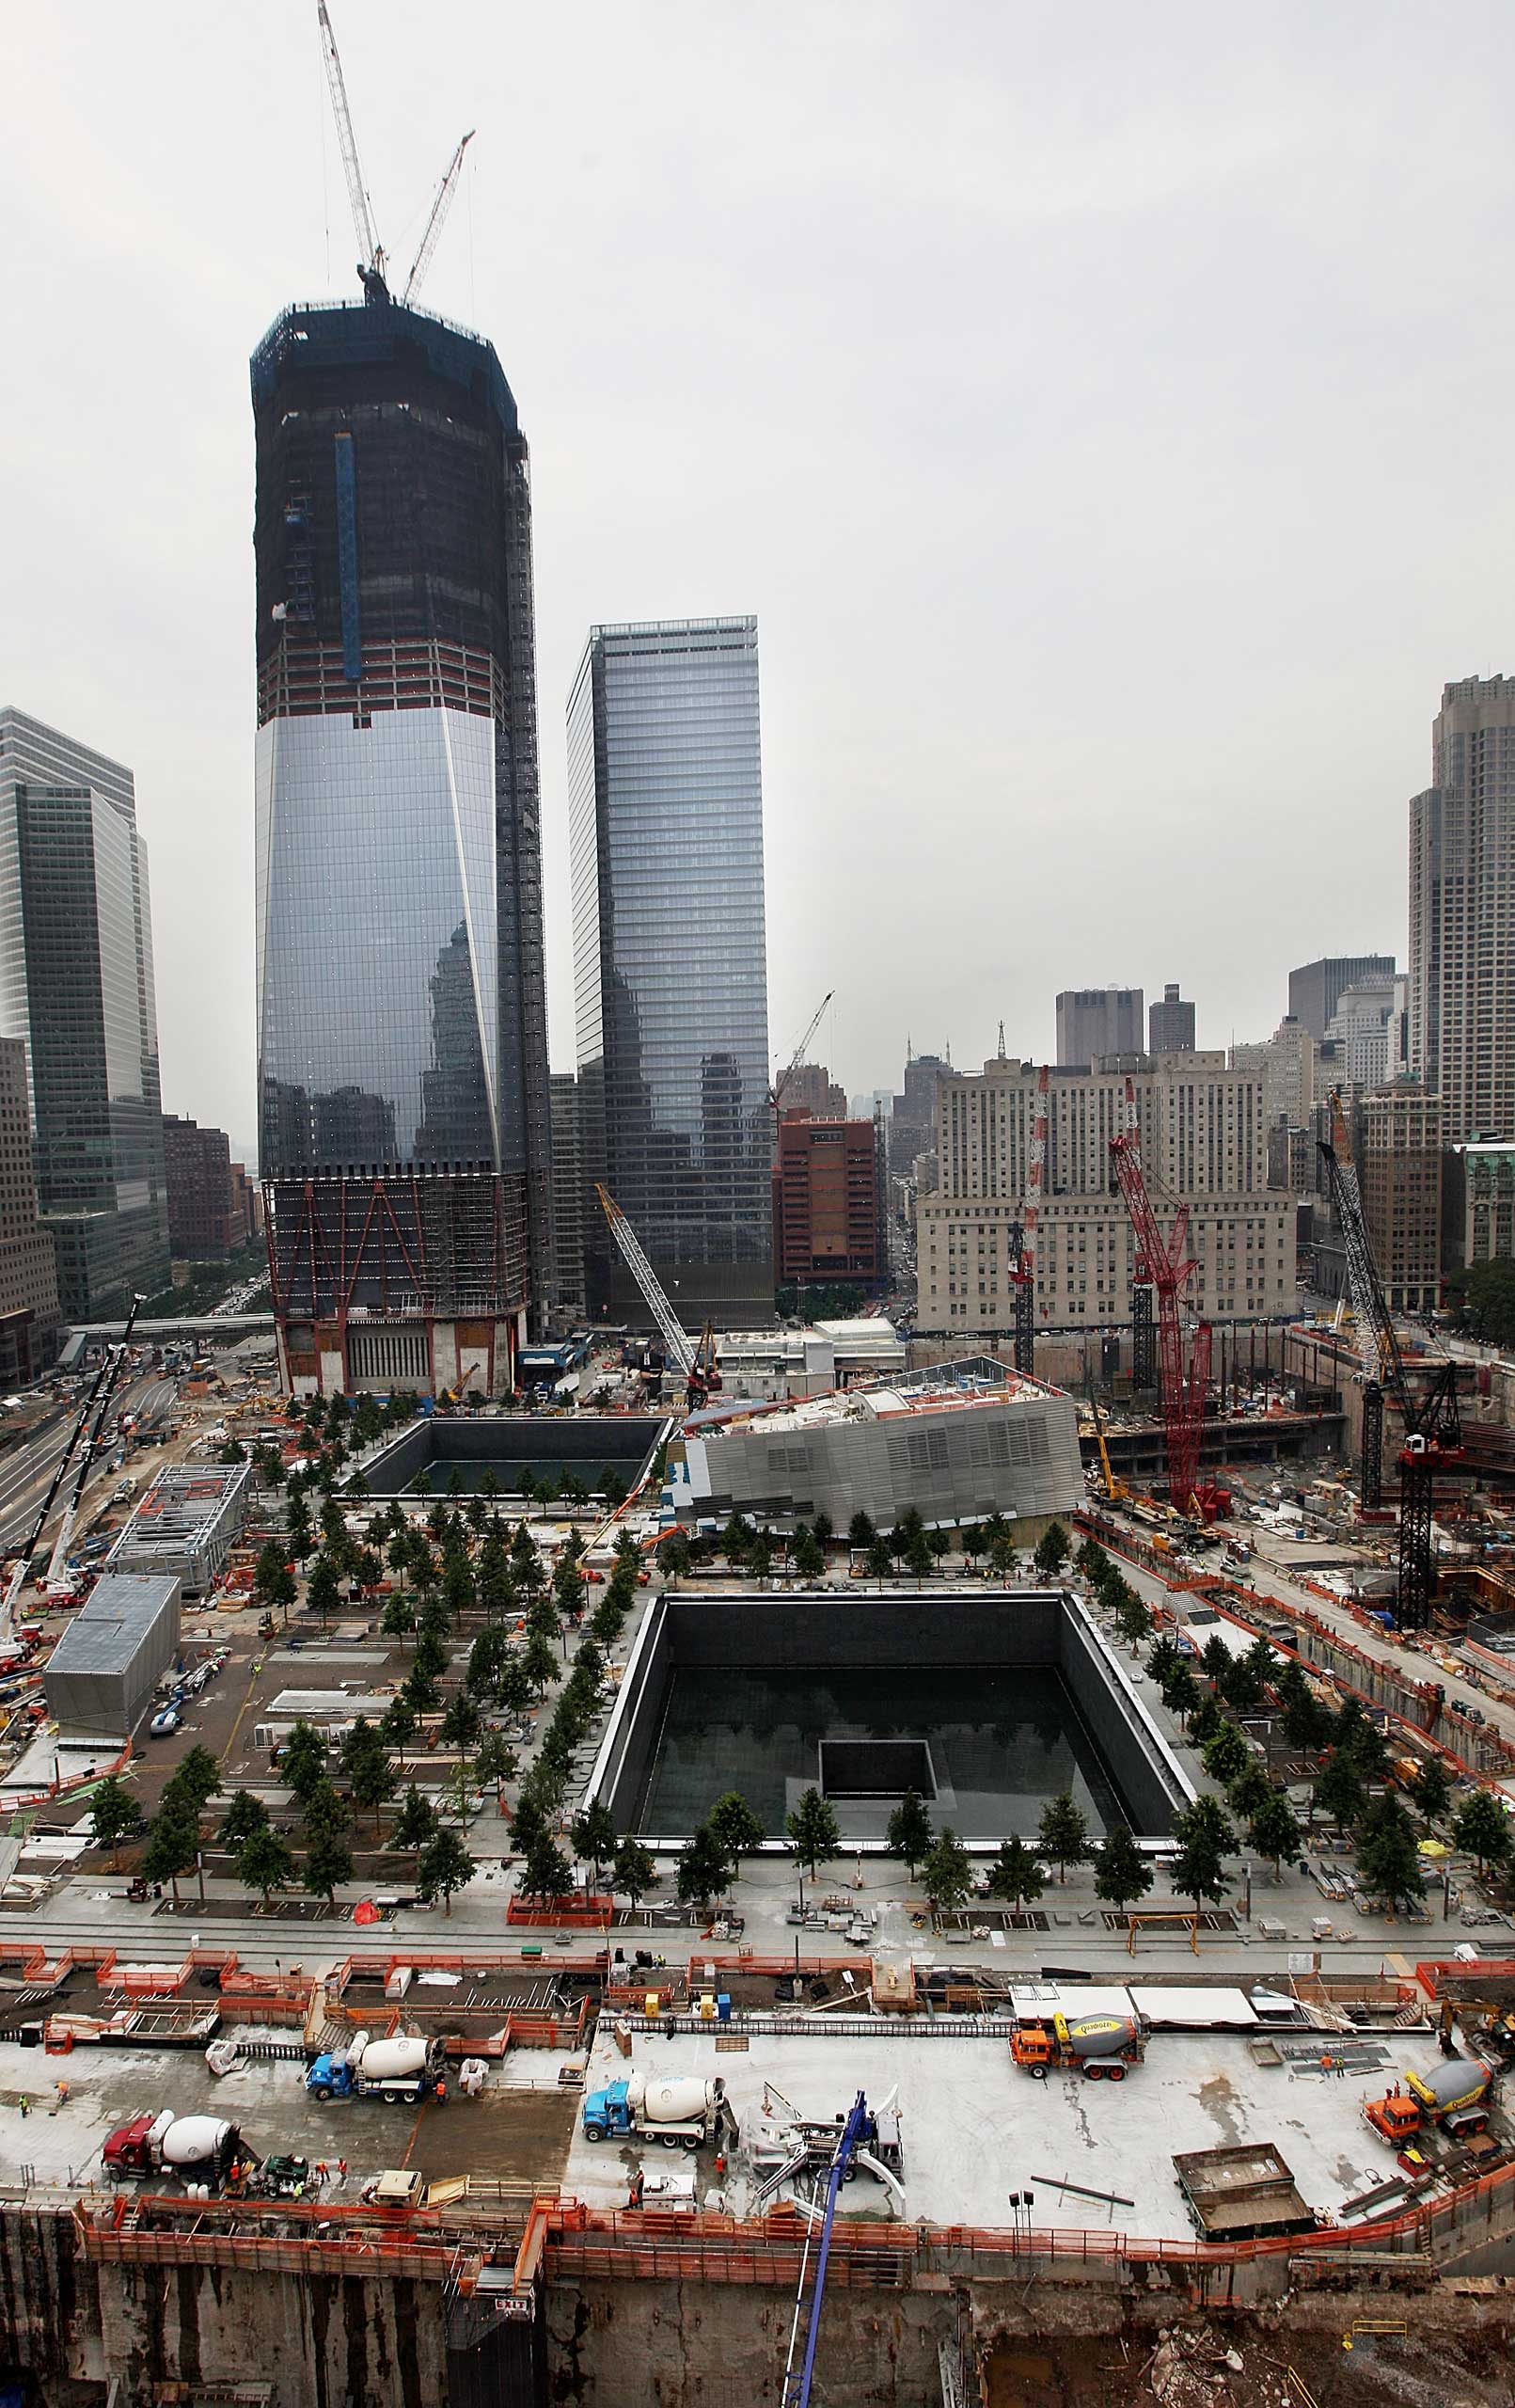 Construction continues on One World Trade Center and the National September 11 Memorial & Museum at the World Trade Center site on July 8, 2011.